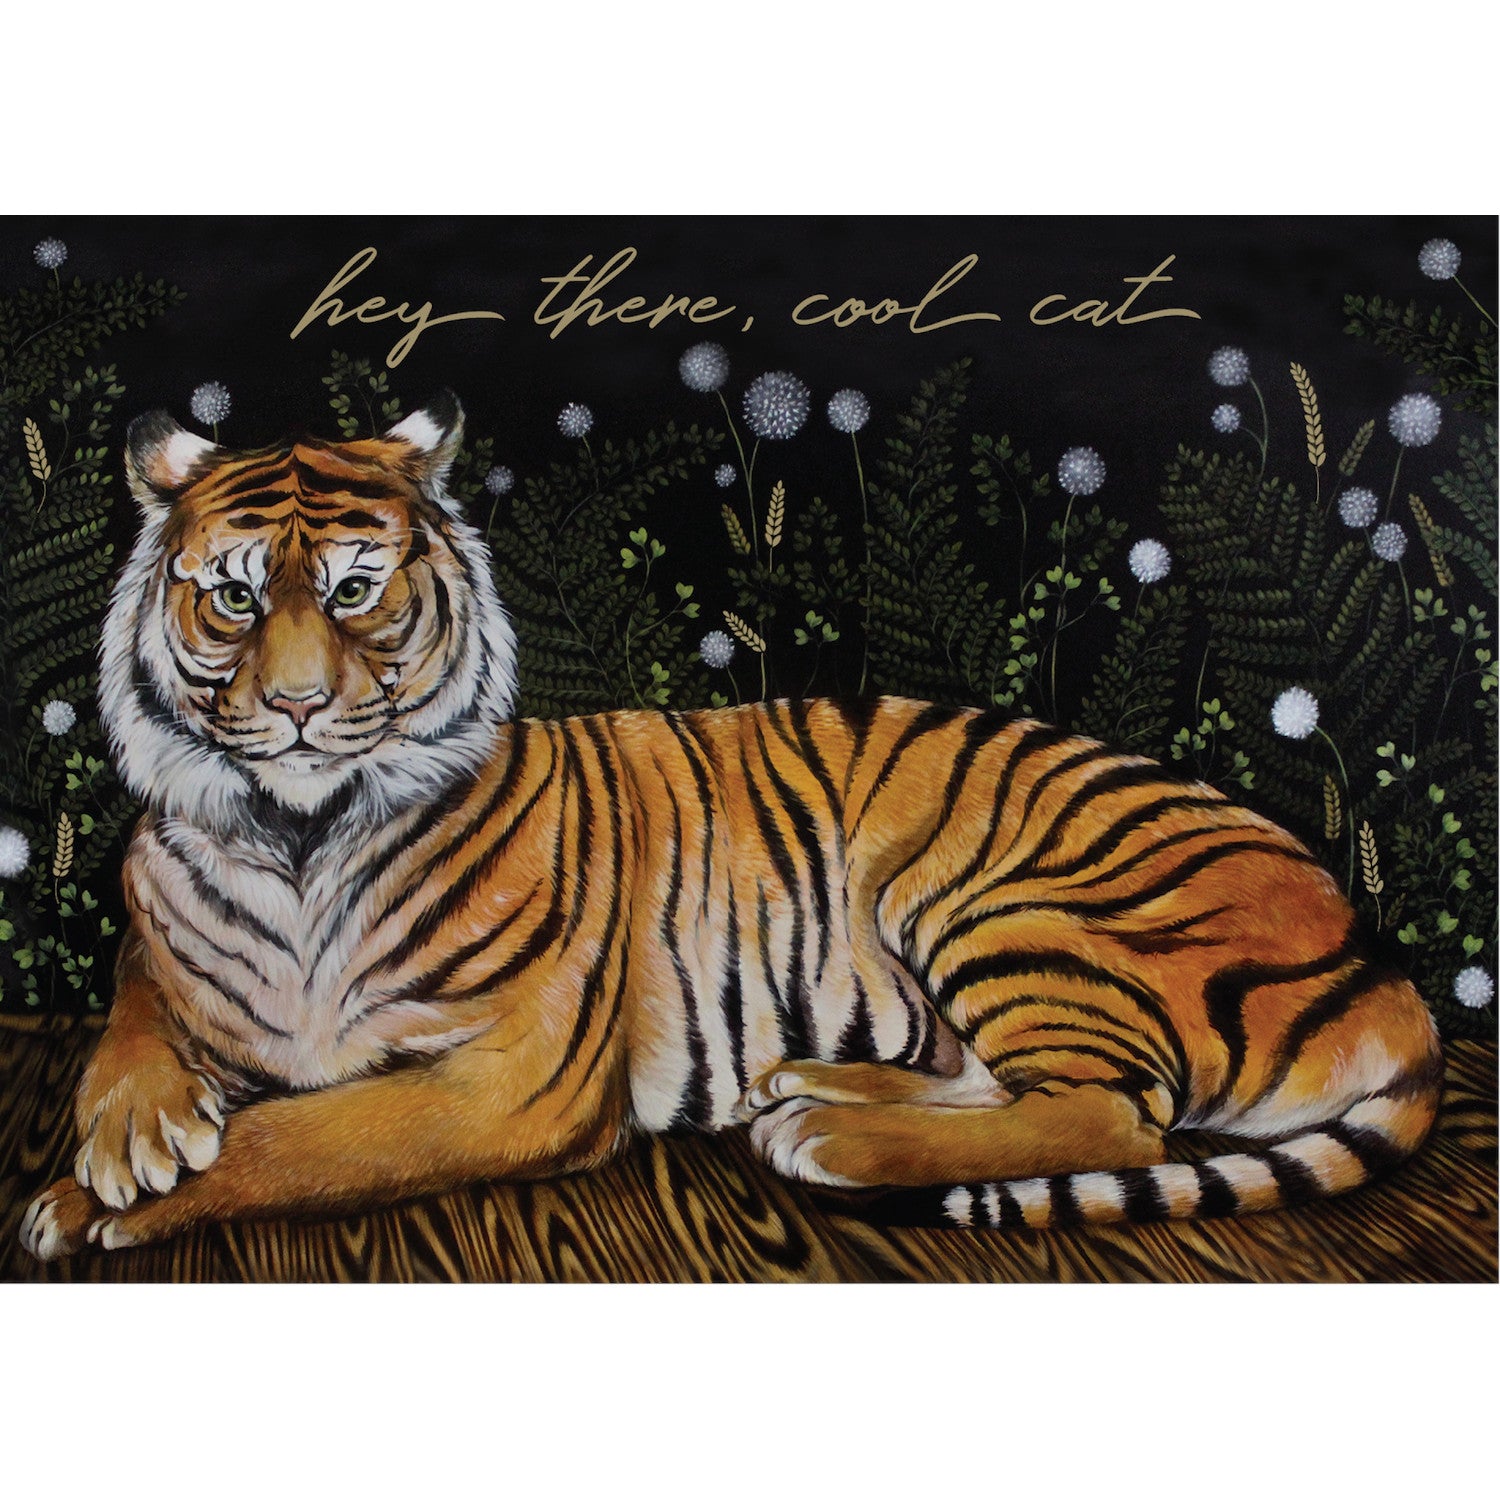 An illustration of a striped tiger lounging on a wood paneled floor on a black background featuring leaves and blooms, with &quot;hey there, cool cat&quot; printed in gold across the top of the card.